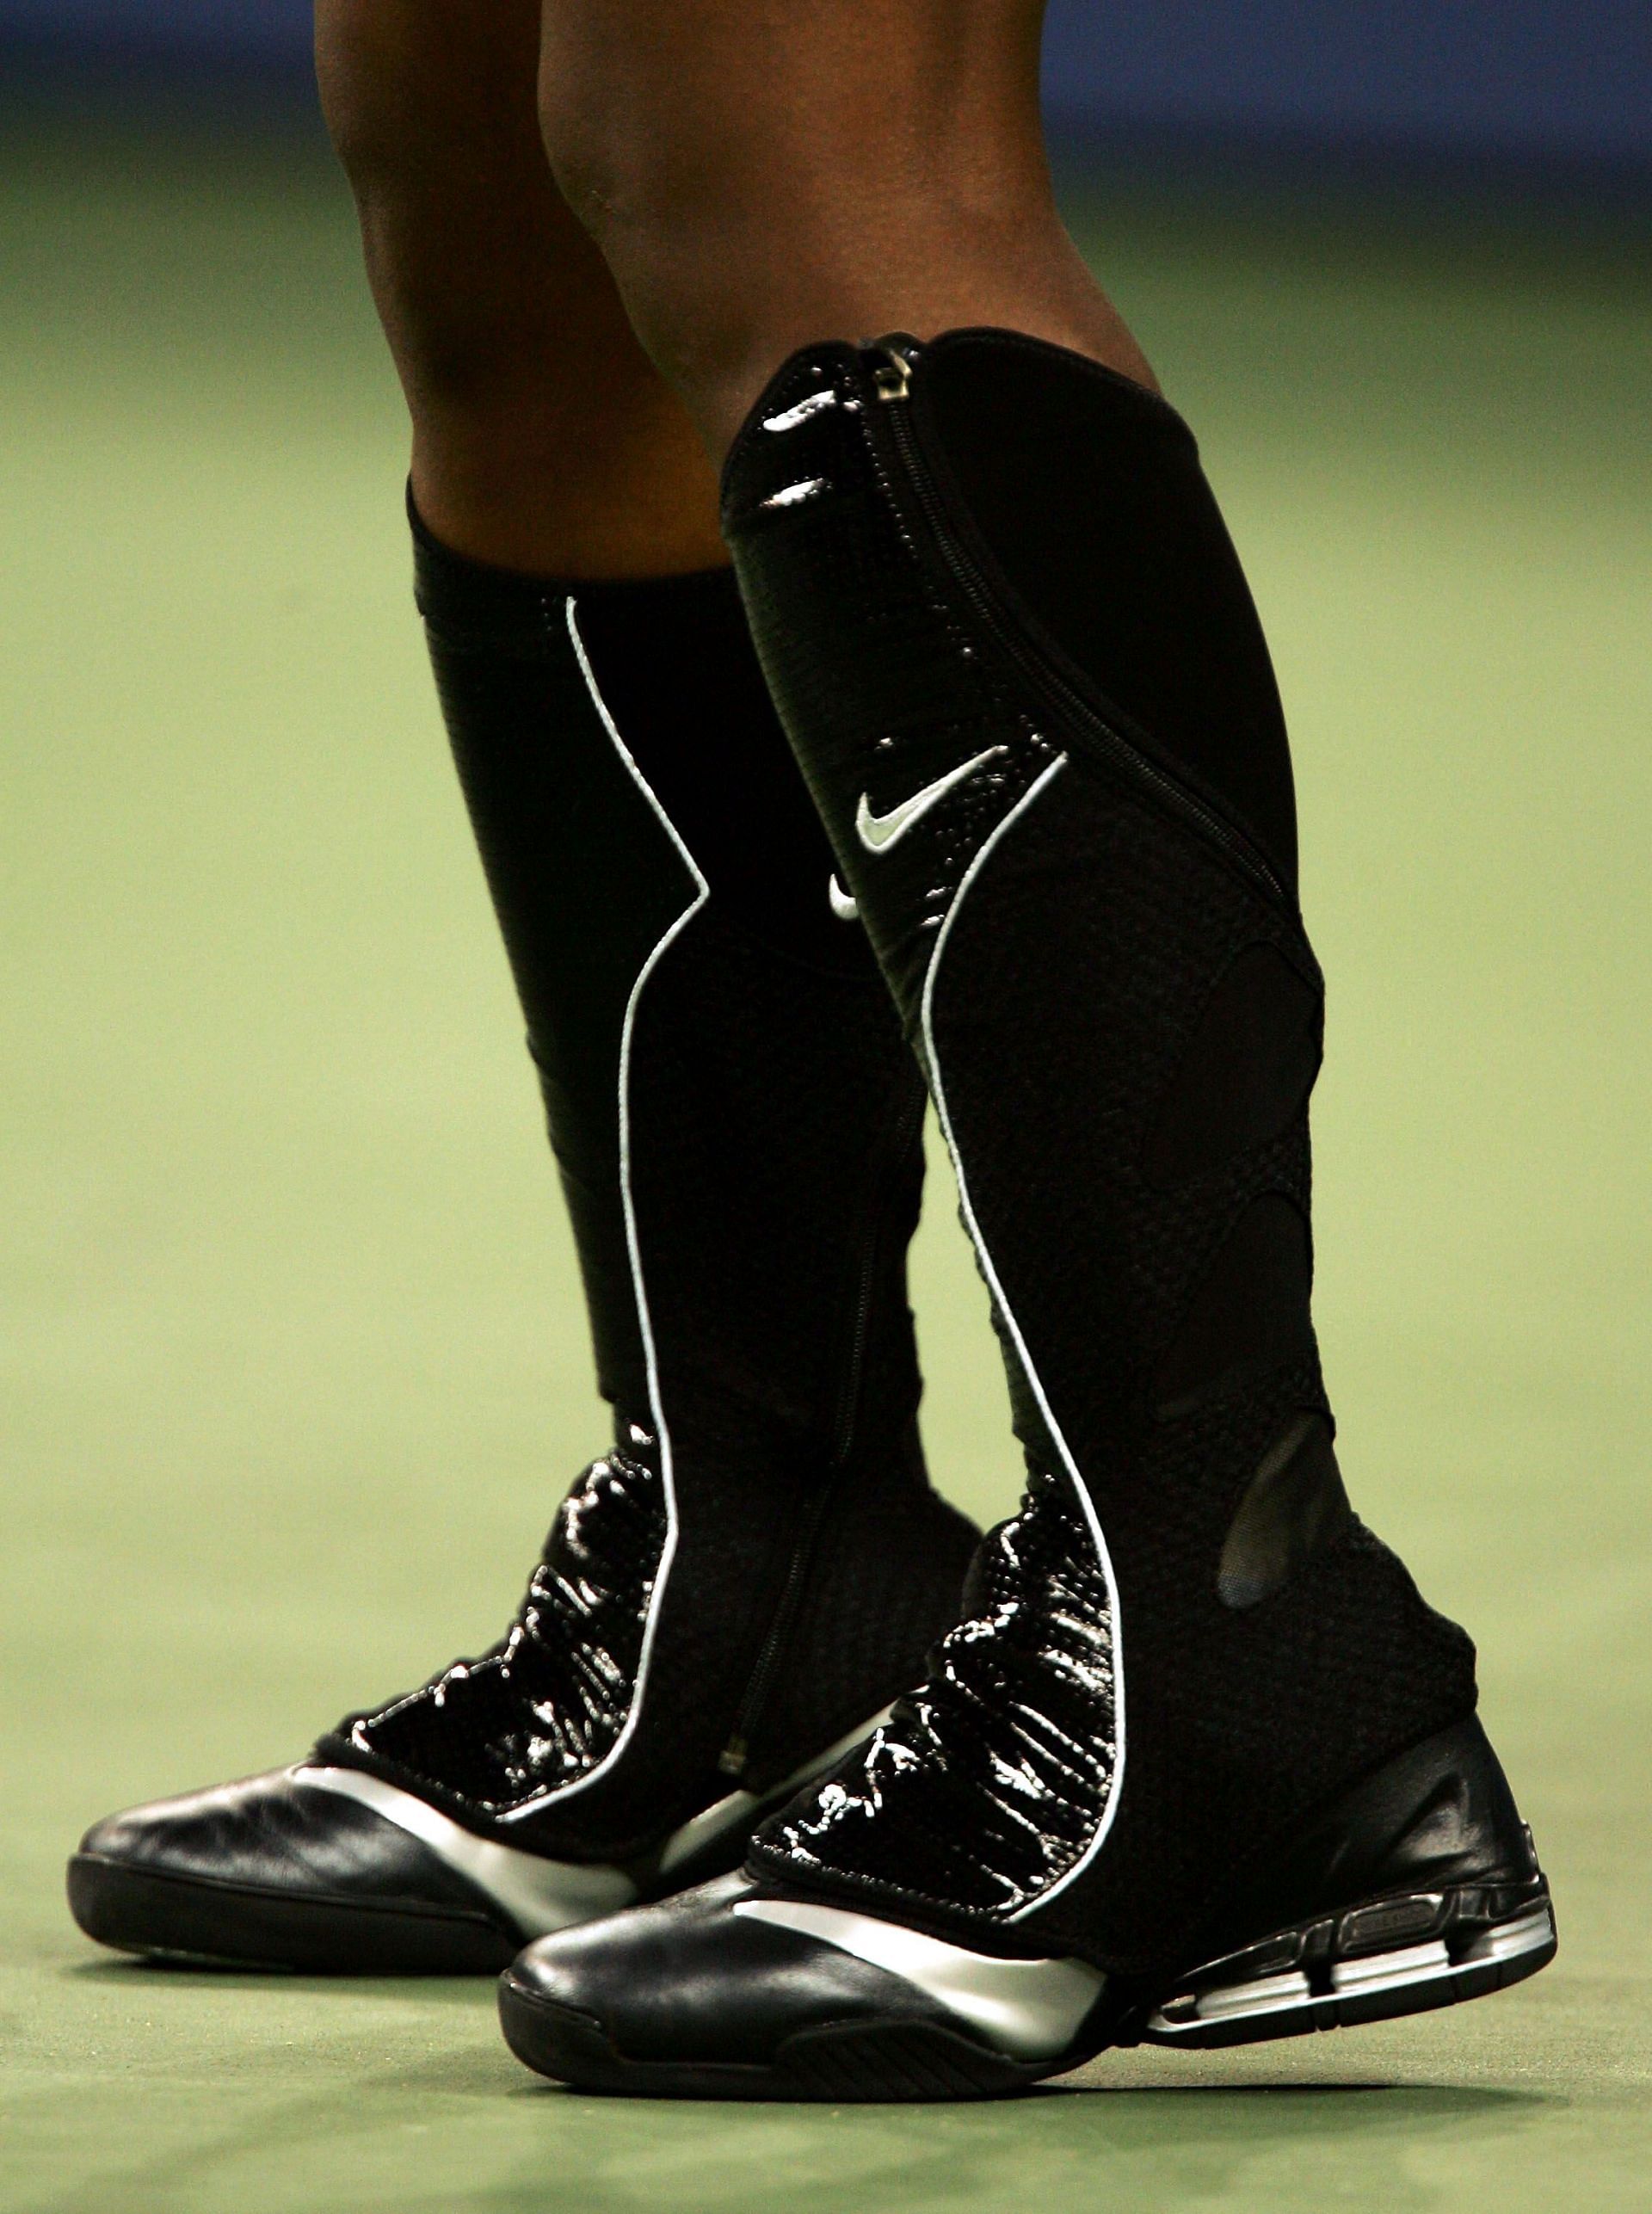 Serena Williams&#039; boots that she wore during her warm-up at the 2004 US Open